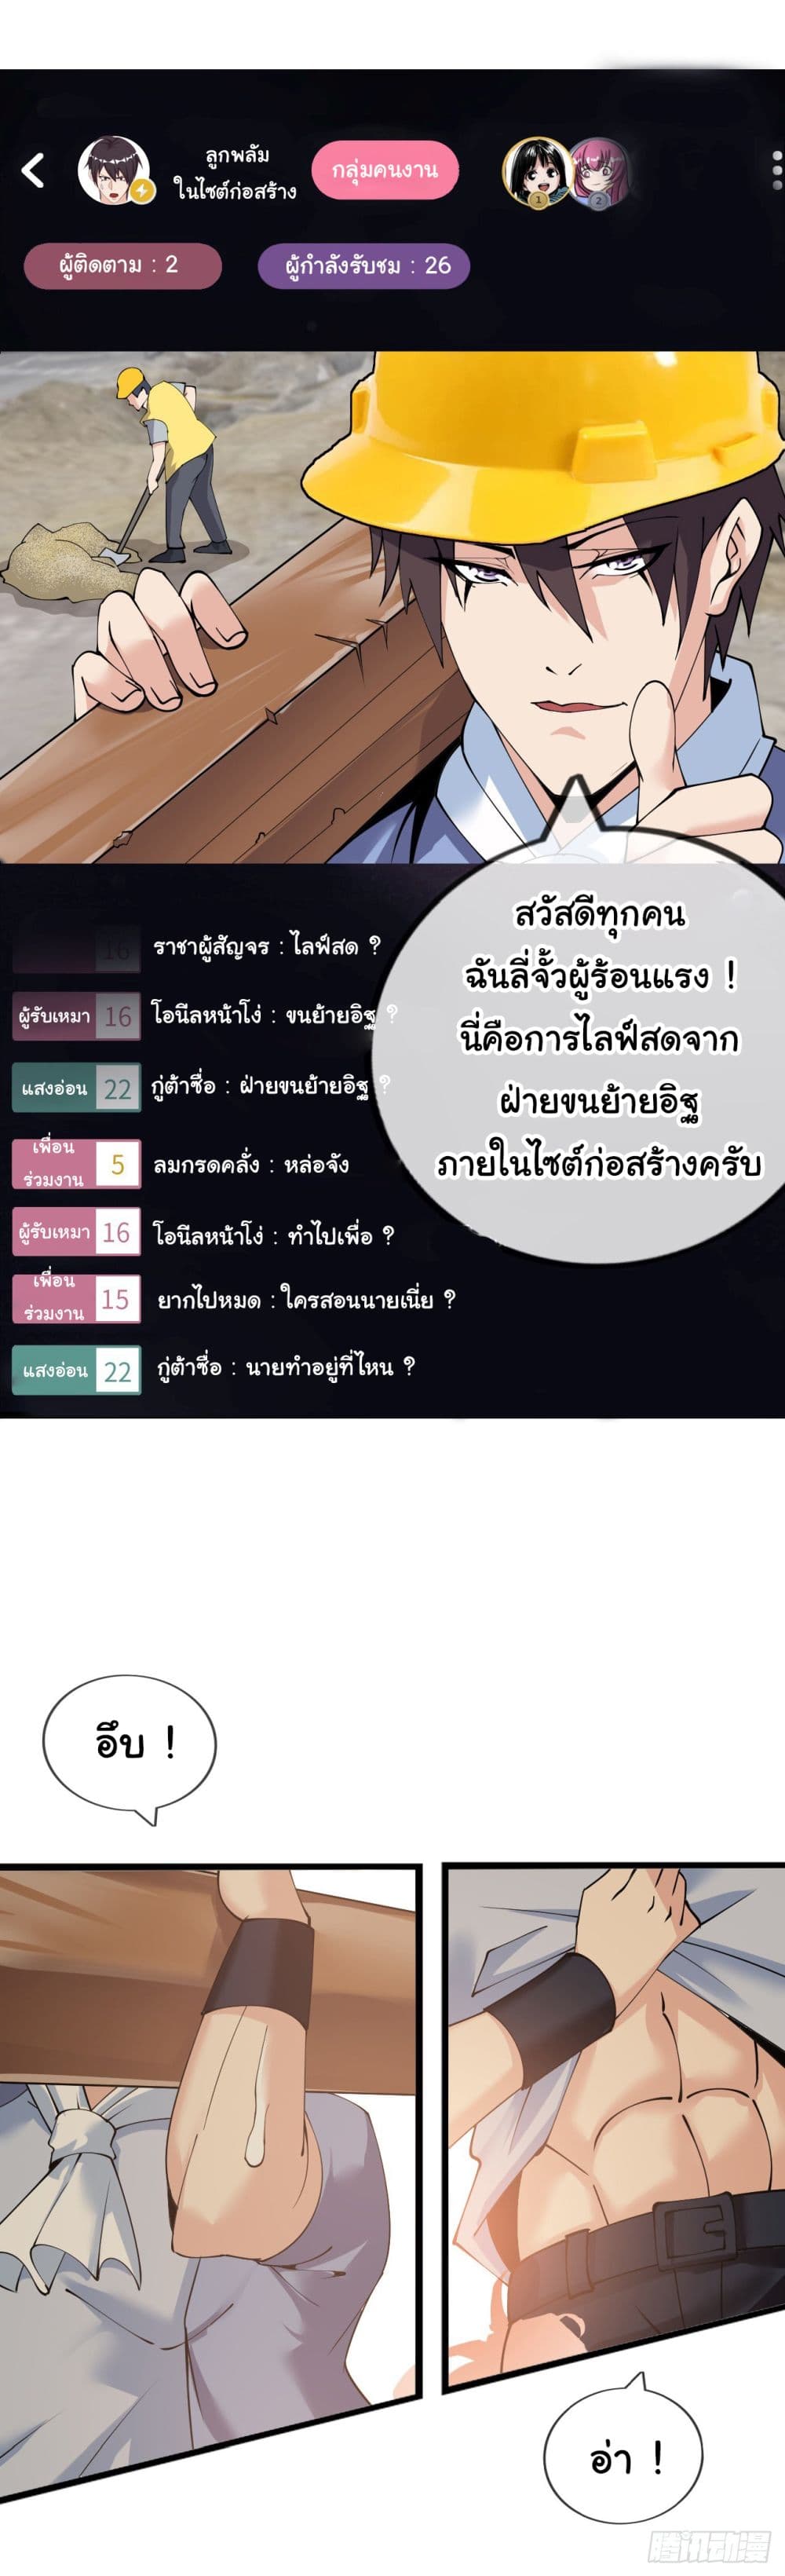 Live Streaming, Walking Across Different Worlds ตอนที่ 1 (54)